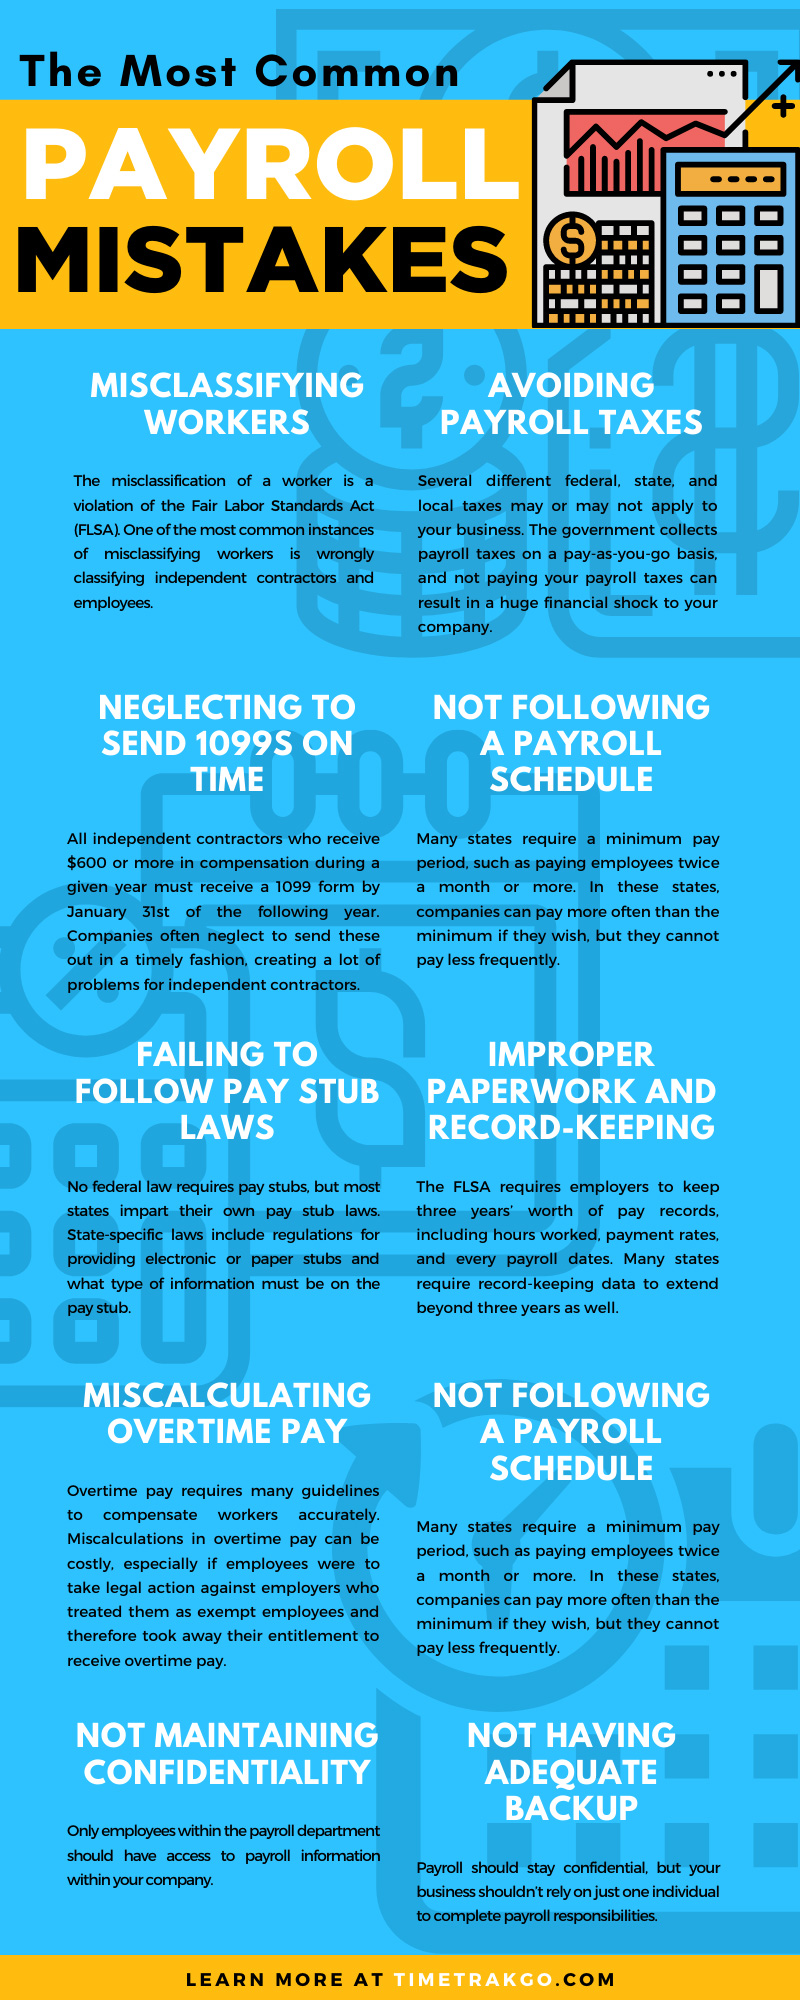 The Most Common Payroll Mistakes